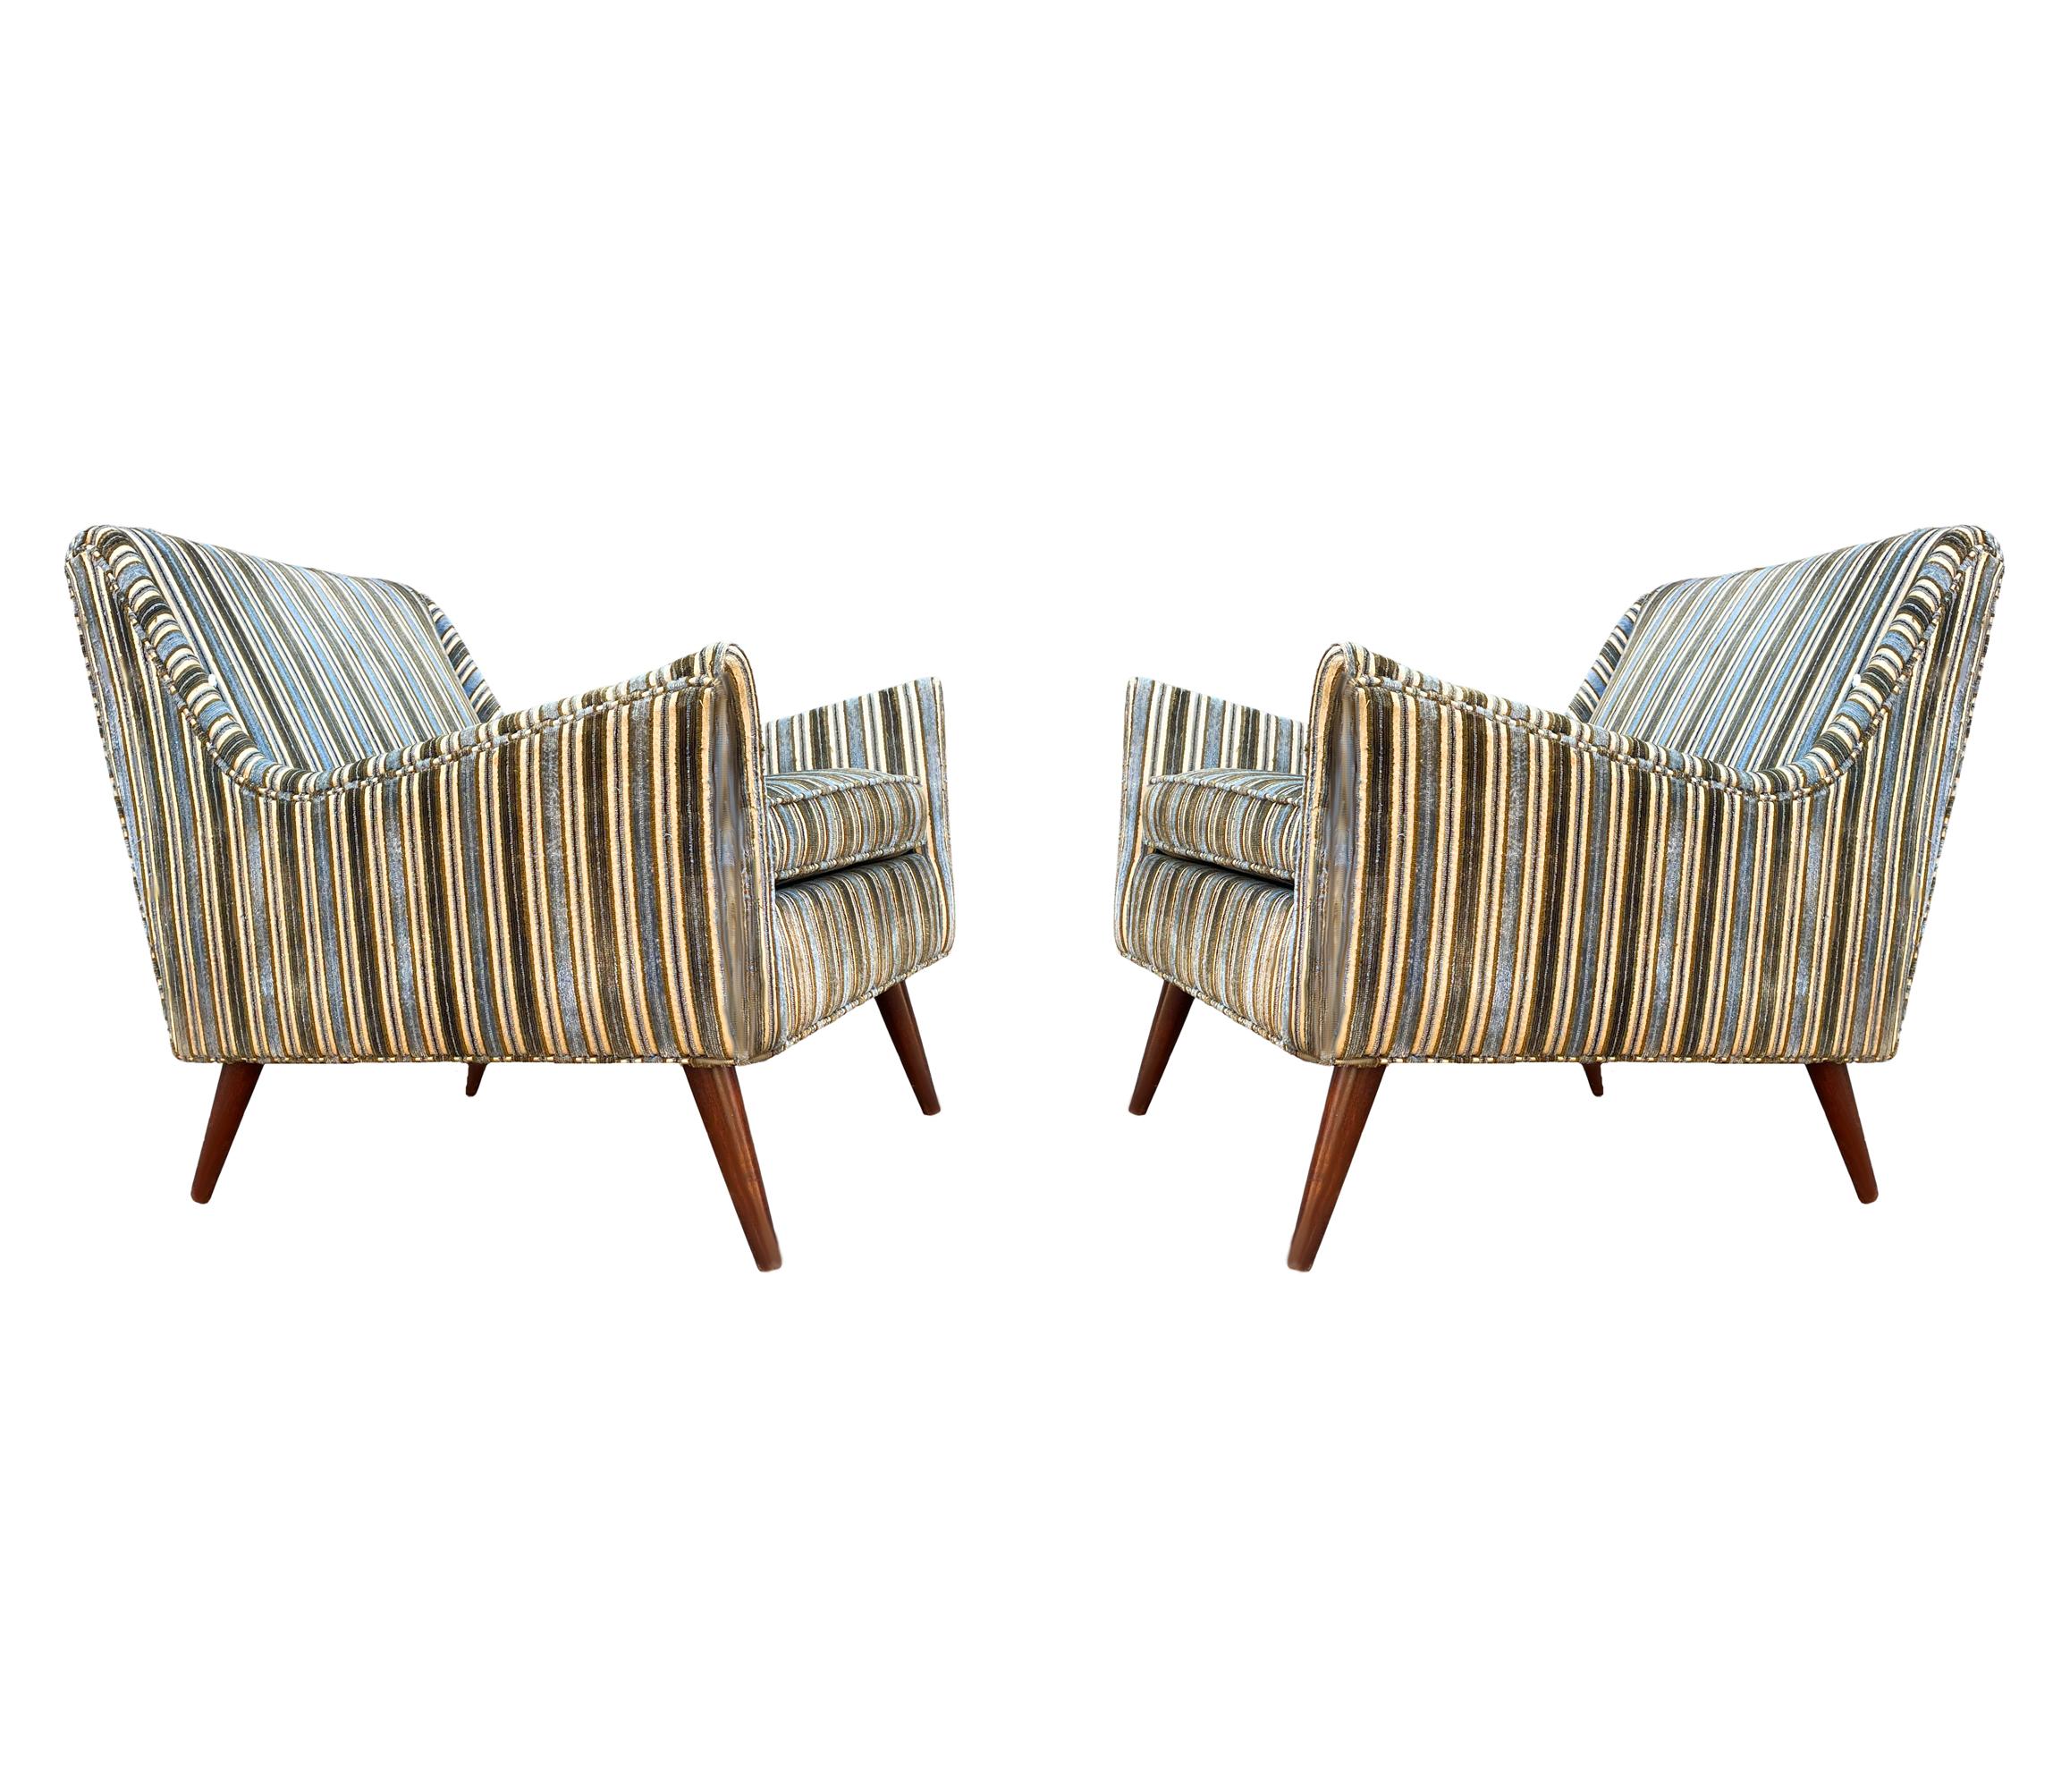 Fabric Pair of Mid-Century Modern Sculptural Lounge Chairs in the the of Harvey Probber For Sale